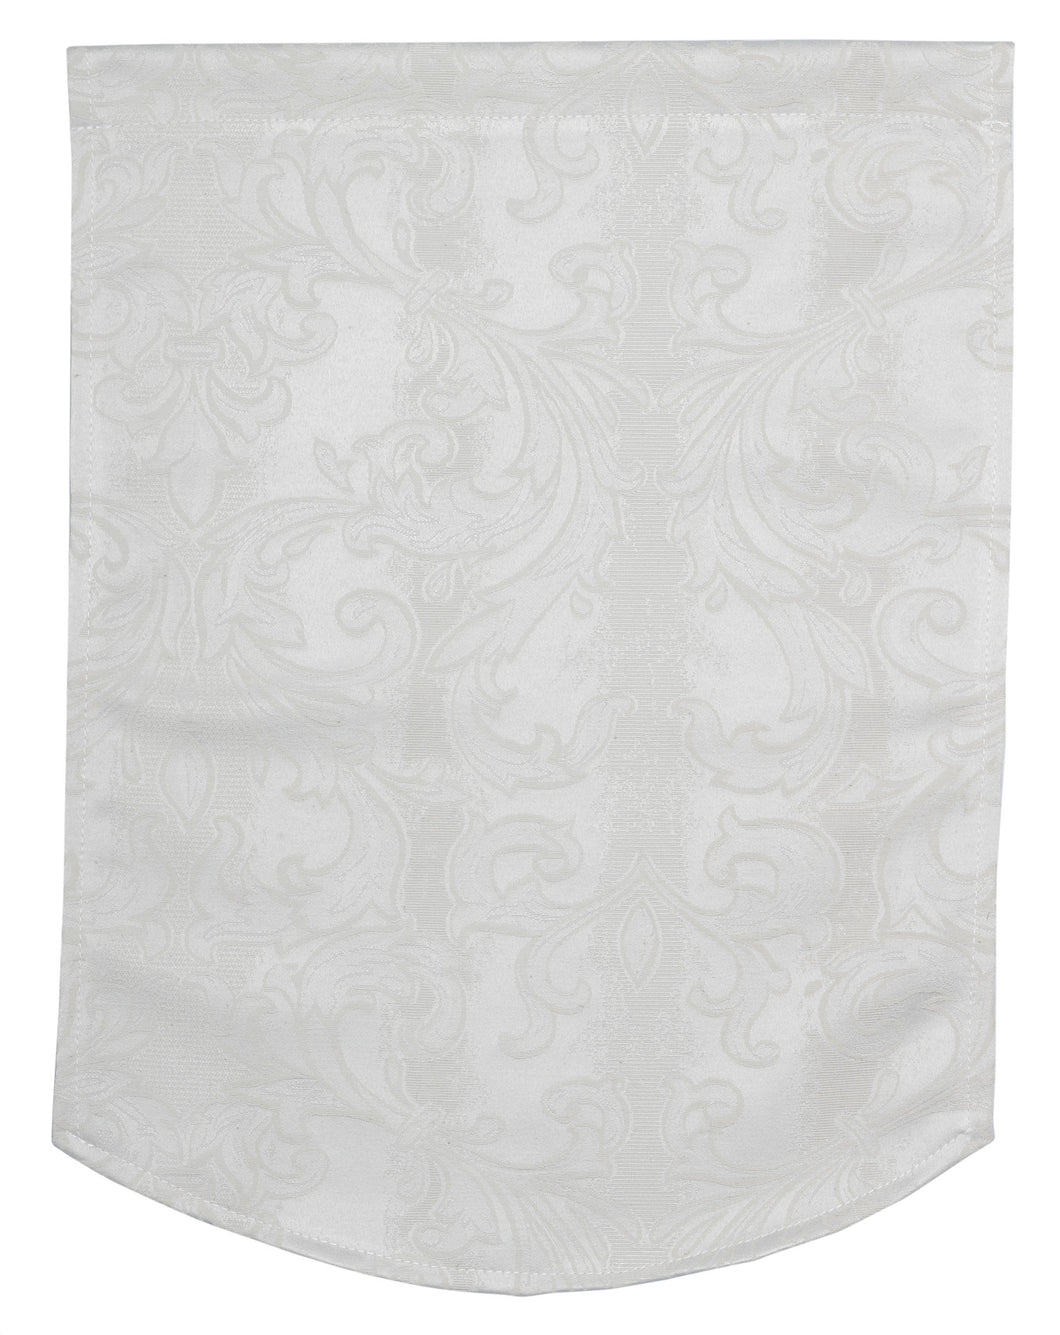 Jacquard Damask Pair of Arm Caps or Chair Back (Cream)